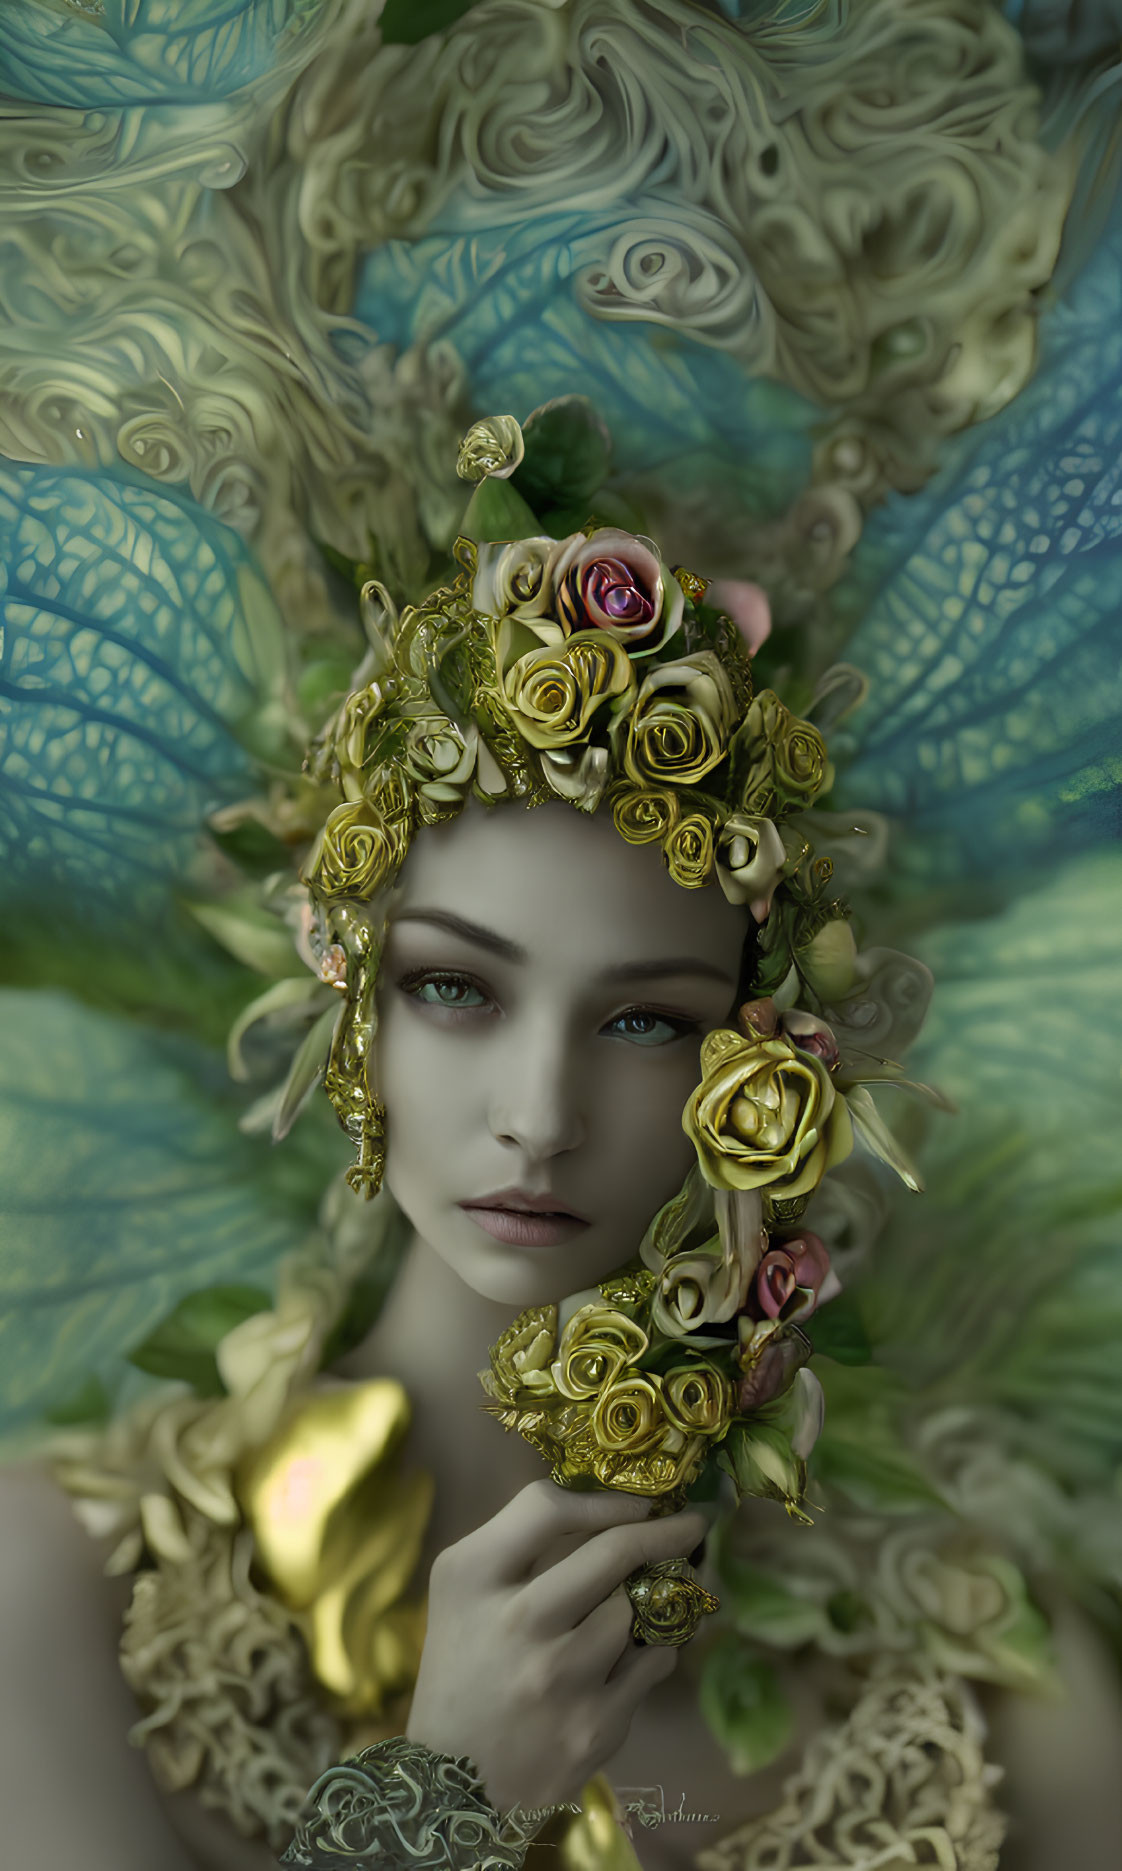 Ethereal portrait of woman with golden floral adornments and blue butterfly wings.